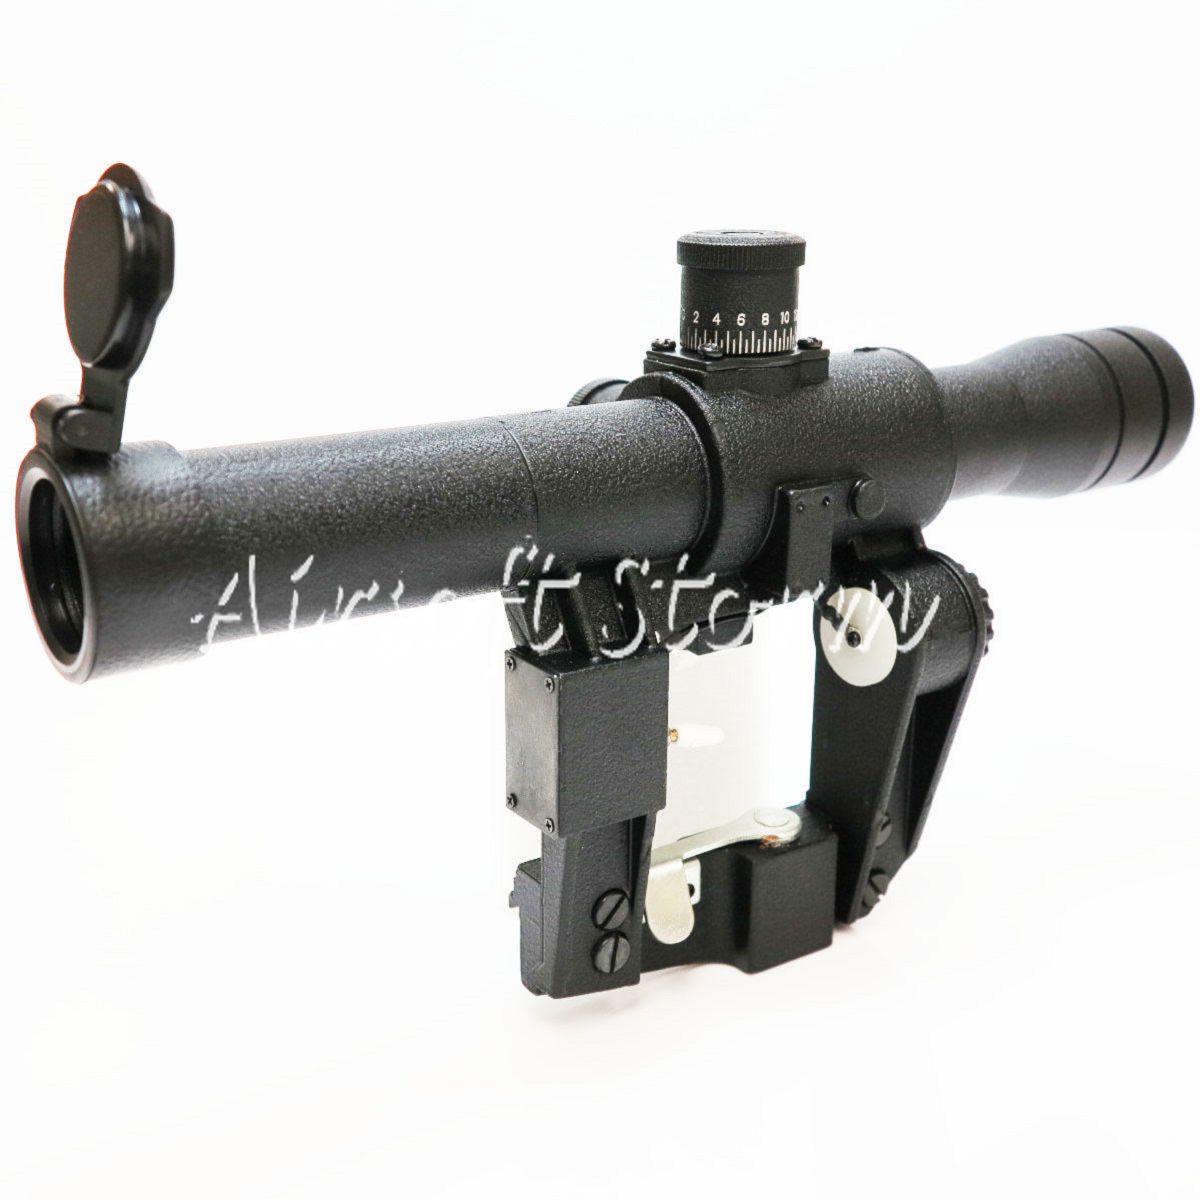 SWAT Gear Tactical 4x26 Red Illuminated Scope For VSS Series Airsoft Rifle SEAF45